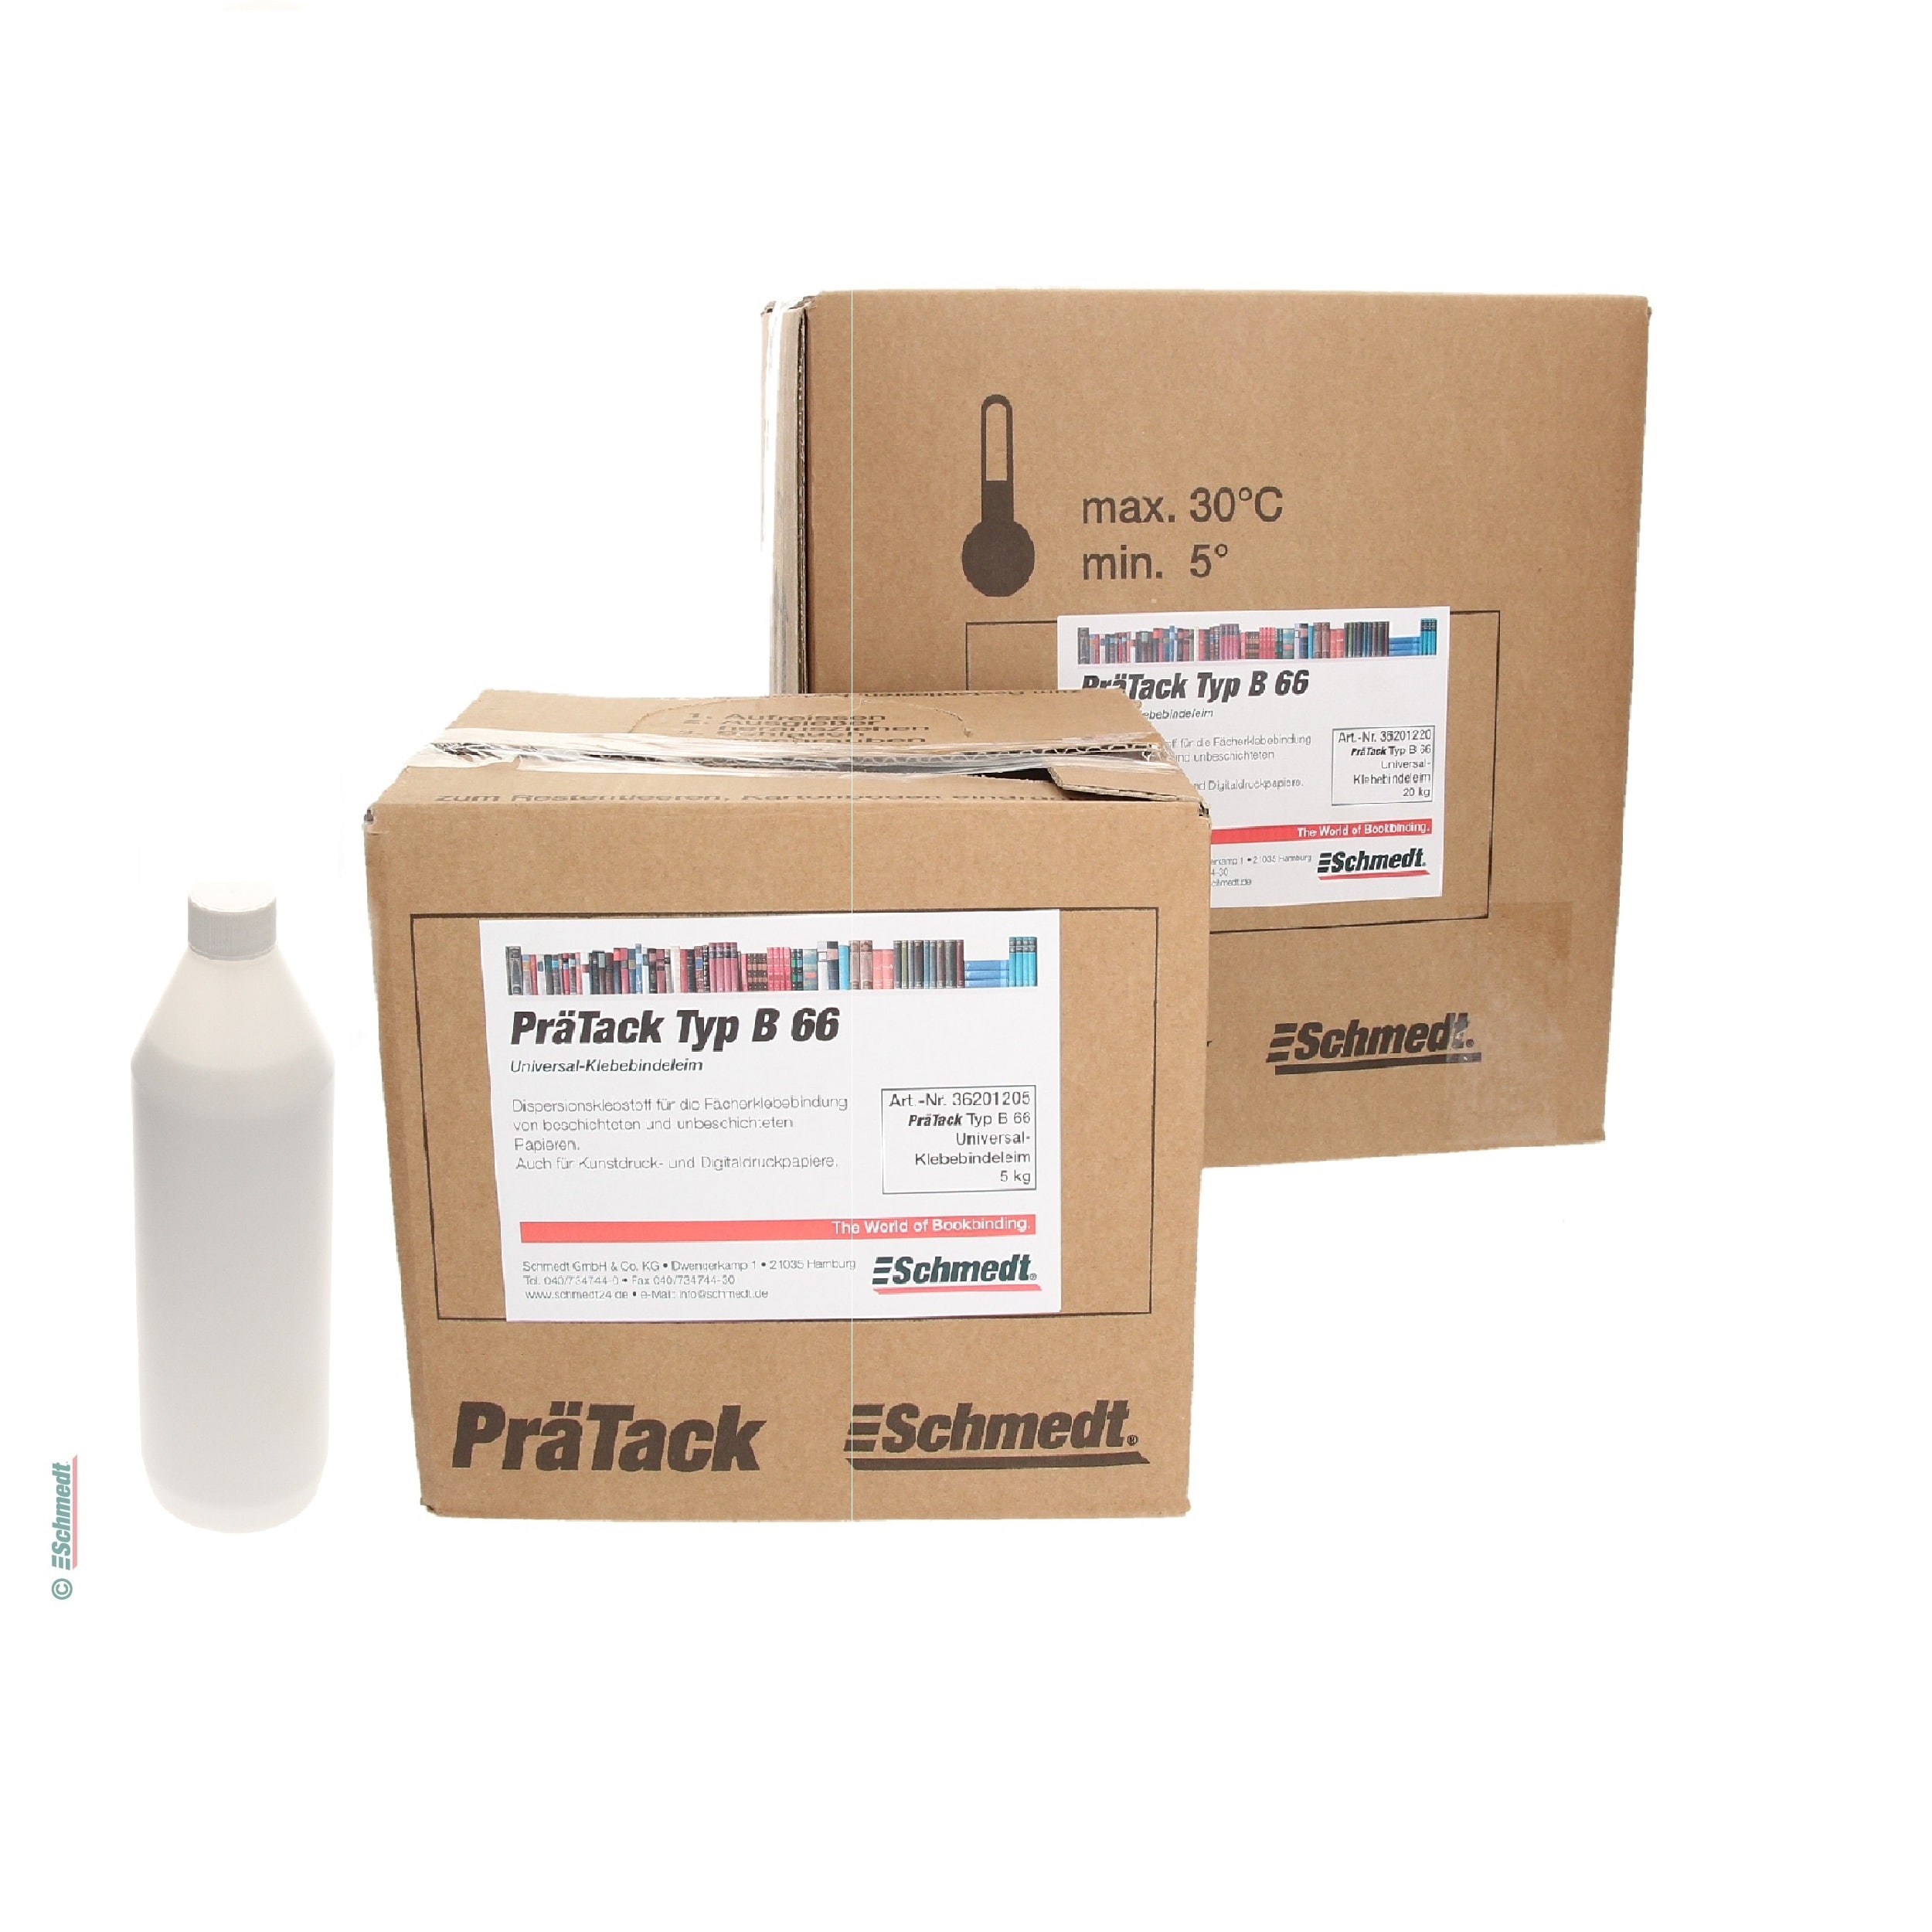 PräTack B66 - Dispersion glue for universal bookbinding works - for fan-binding of treated and untreated paper qualities (also for art paper... - image-1